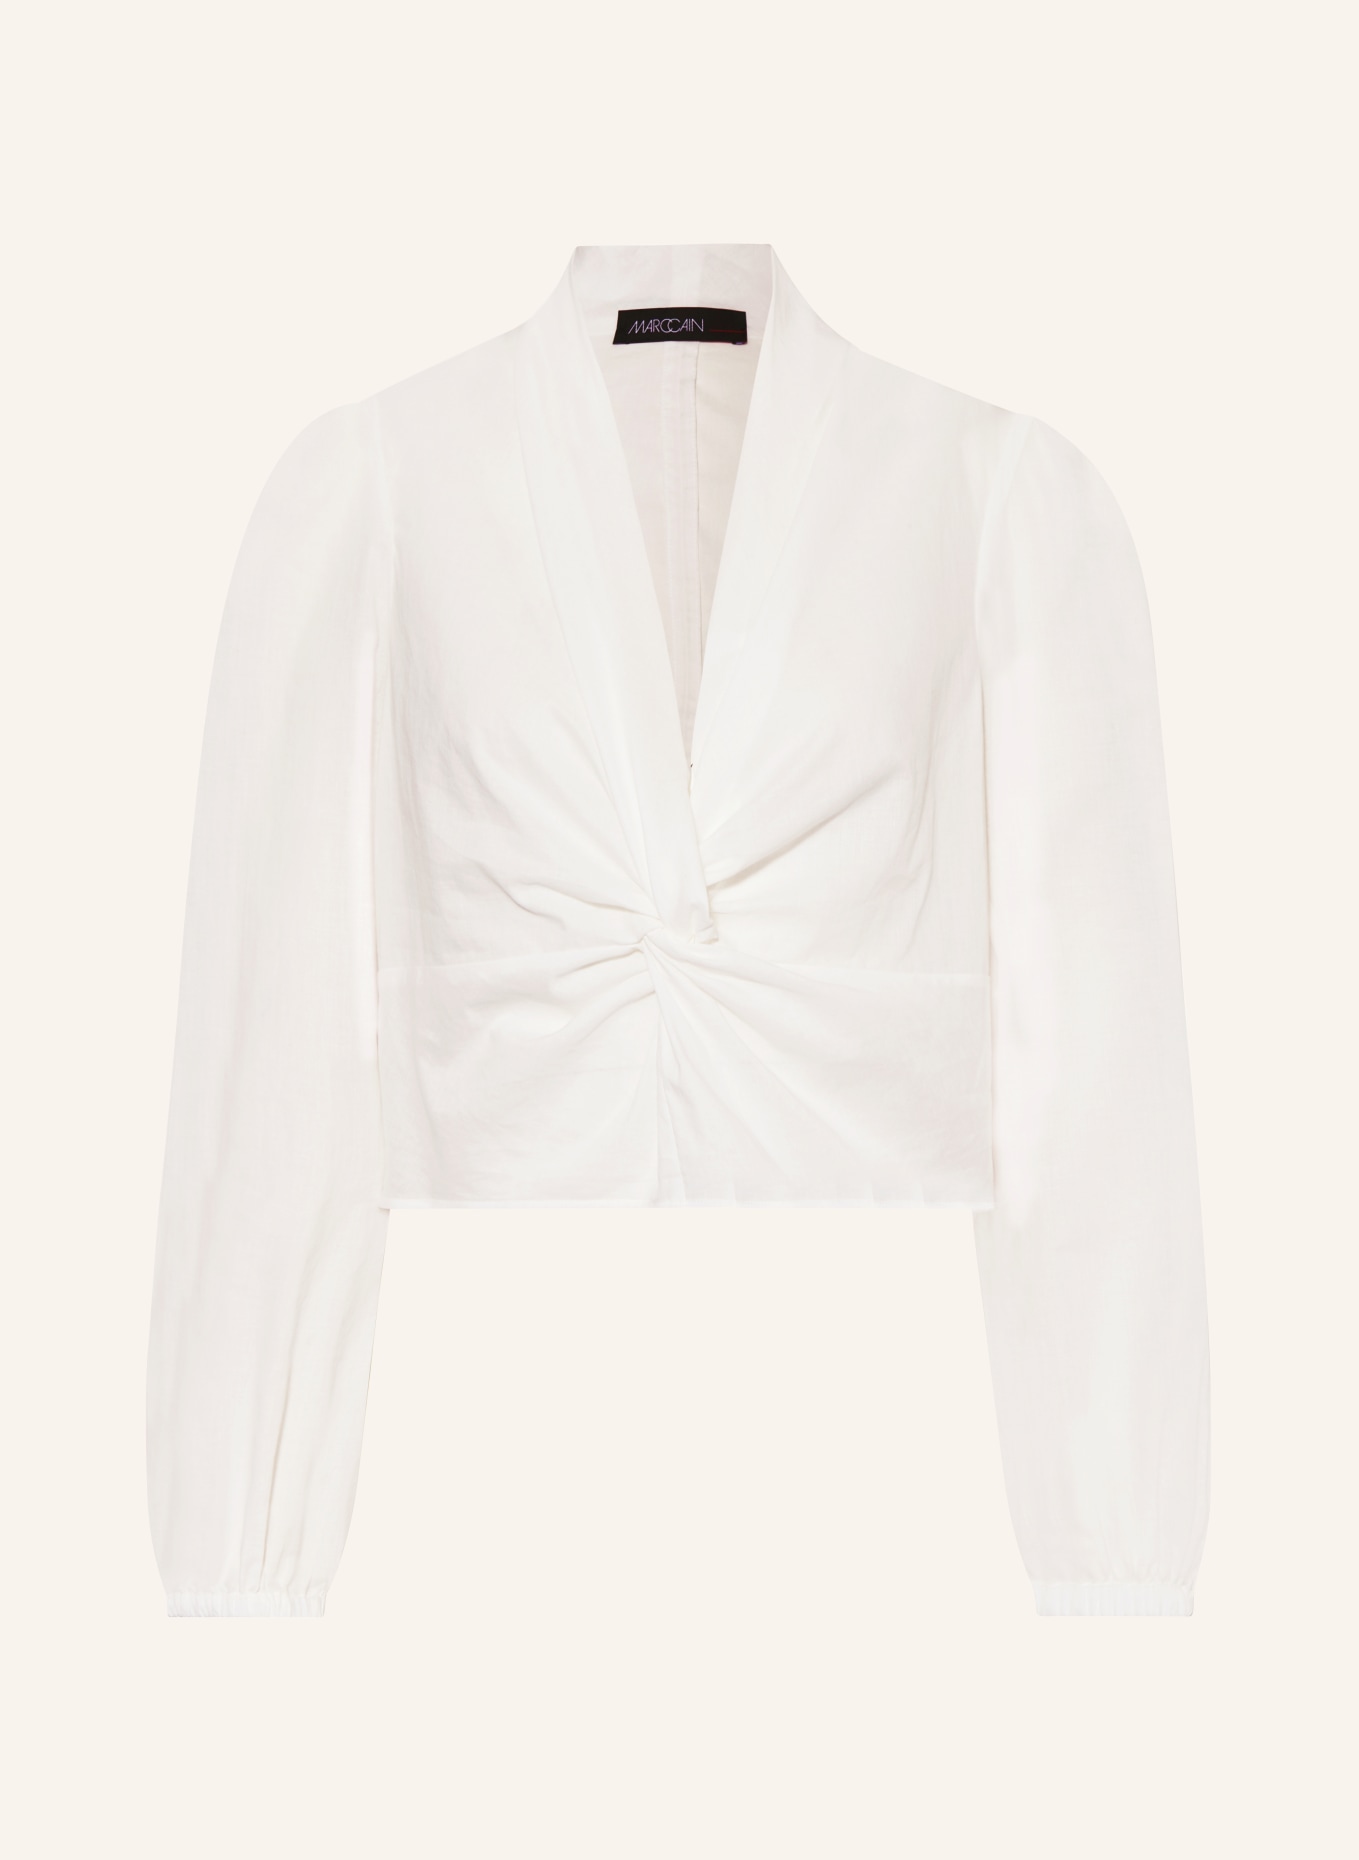 MARC CAIN Cropped shirt blouse, Color: 110 off (Image 1)